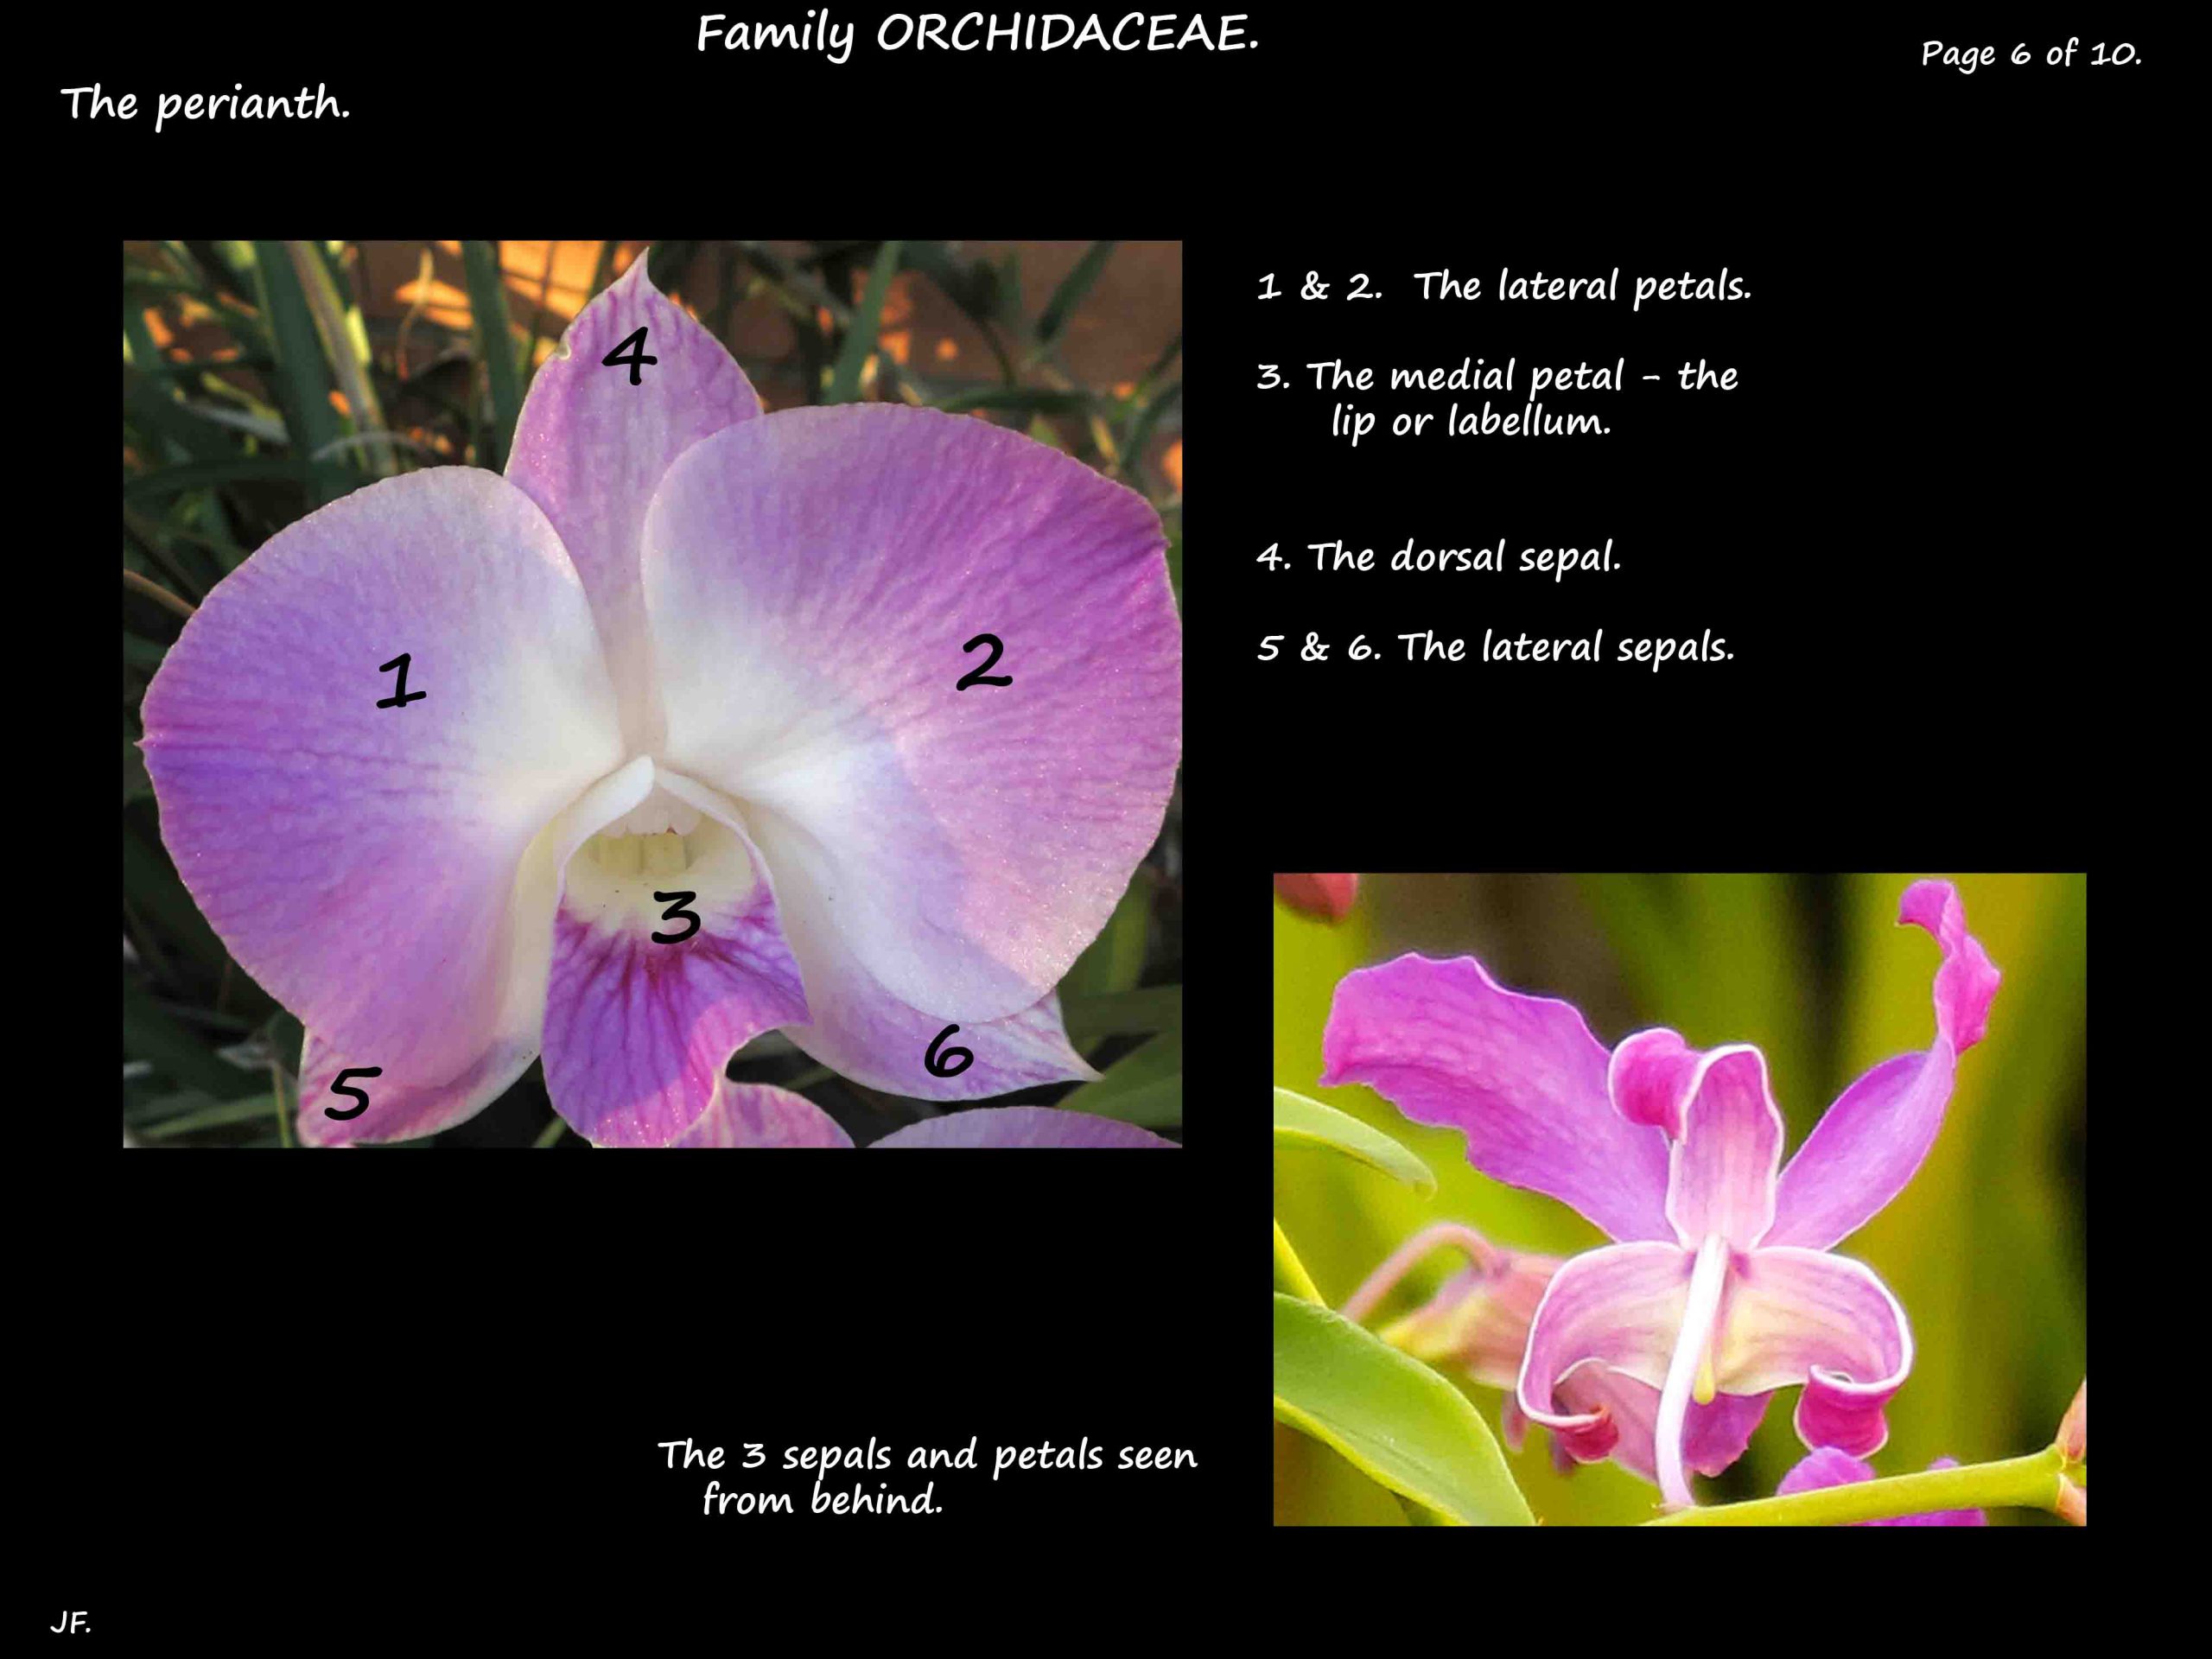 6 Orchid perianth